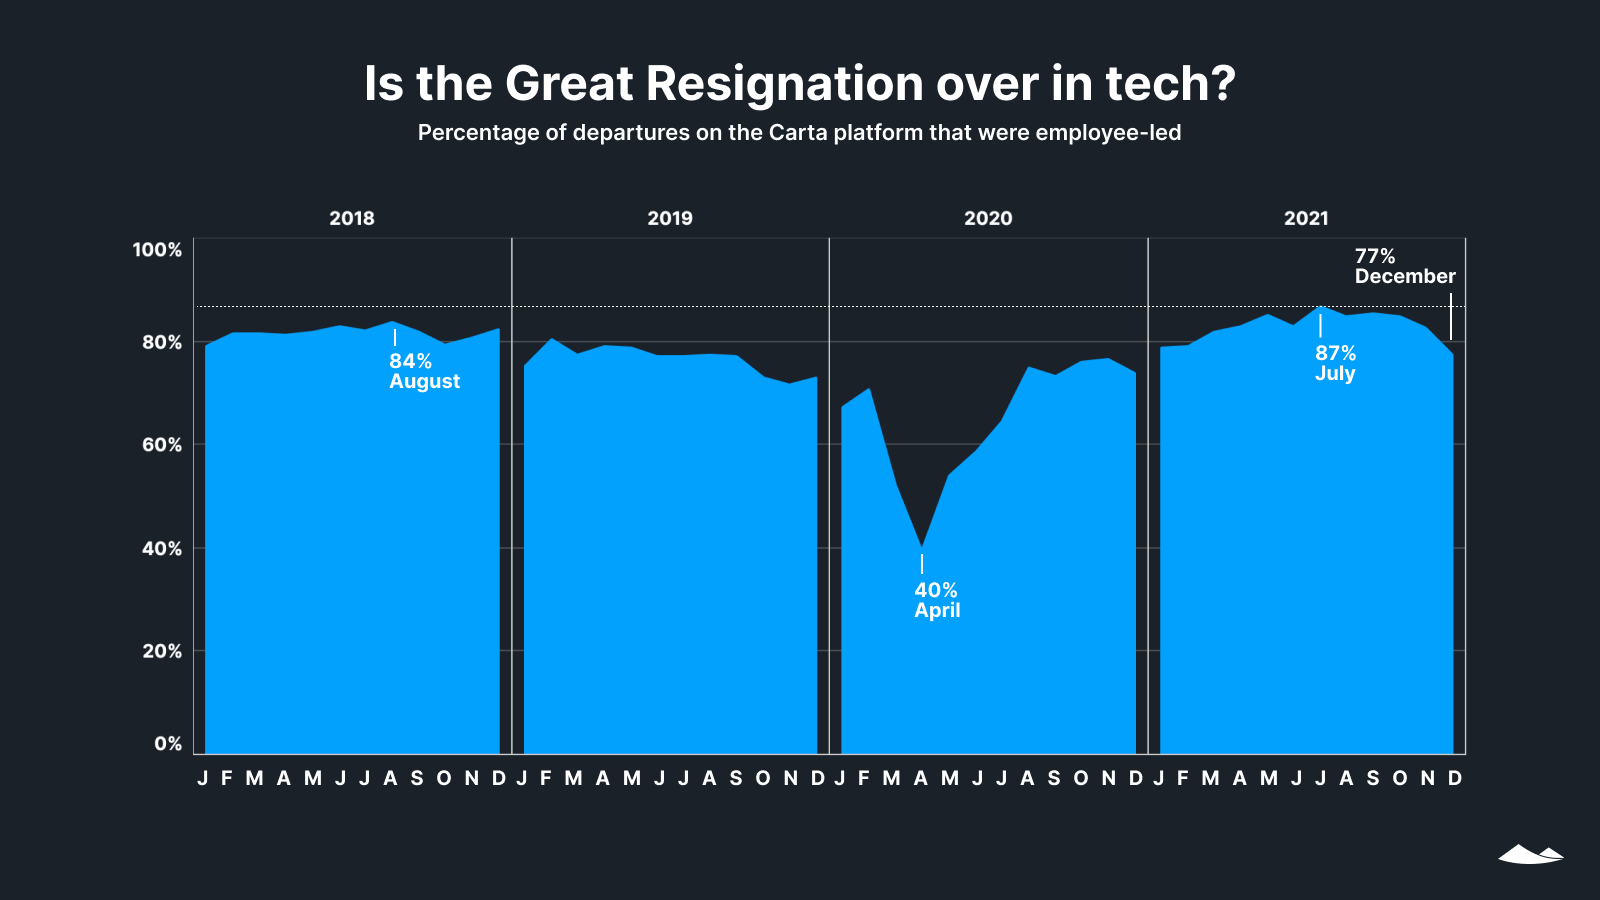 Is the Great Resignation over in tech? Percentage of departures on the Carta platform that were employee-led by month, 2018-2021